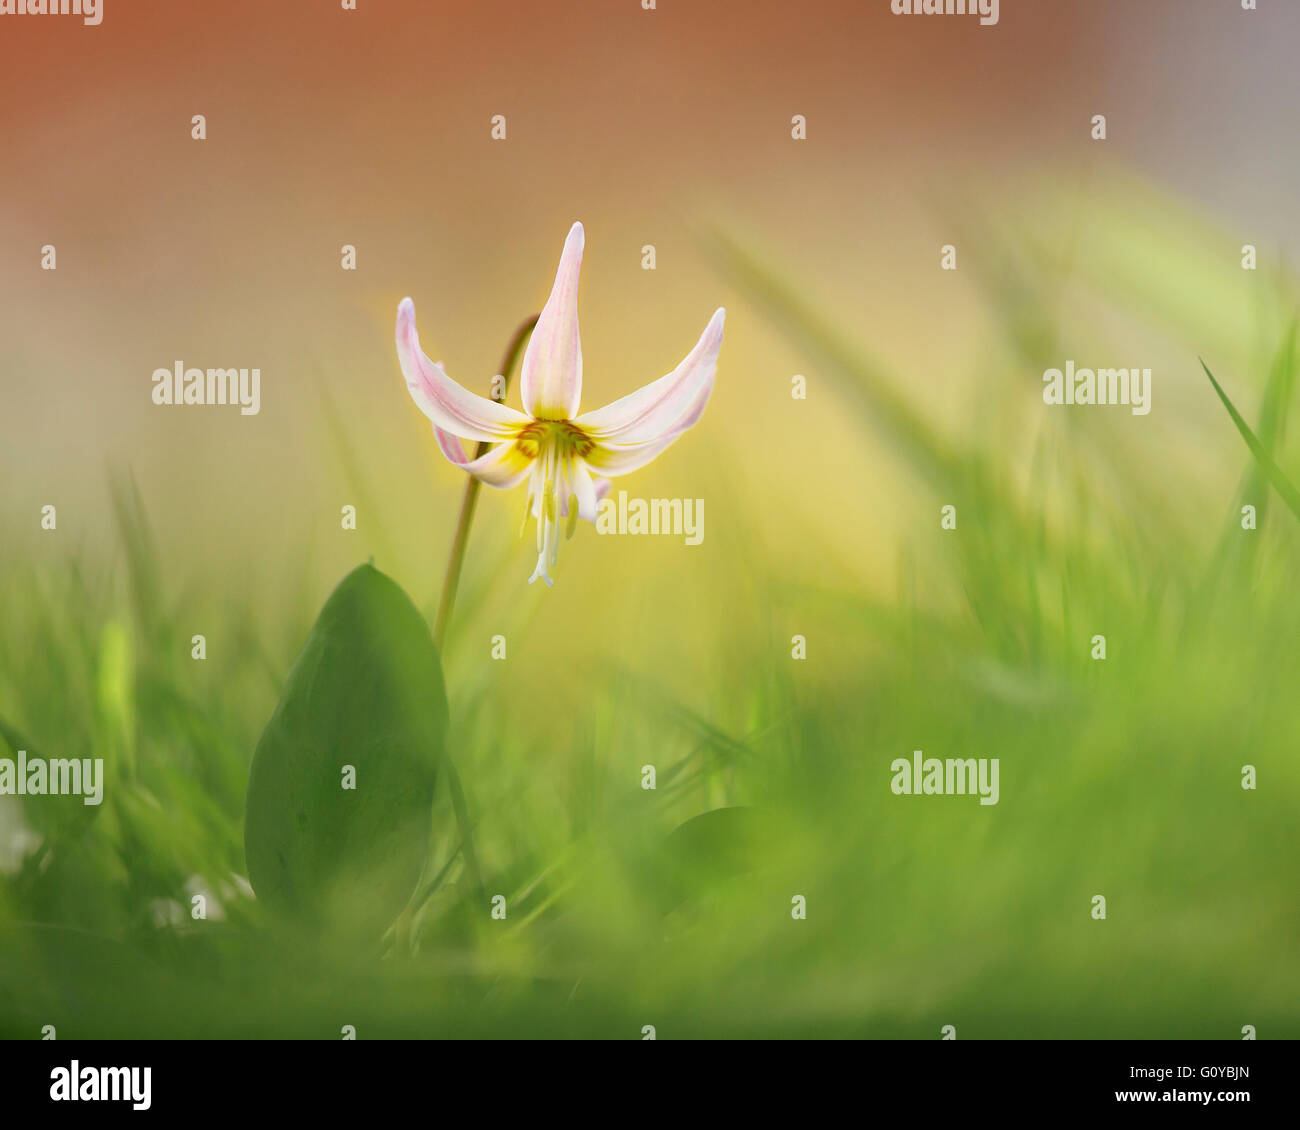 Fawn lily, Erythronium, Erythronium 'Rosalind', Beauty in Nature, Bulb, Colour, Contemporary, Cottage garden plant, Creative, Dogtooth violet, Dreamlike, Edible, Flower, Spring Flowering, Food and Drink, Frost hardy, Growing, Outdoor, Pastel Colour, Plant, Stamen, Trout lily, Unusual plant, Pink, Stock Photo